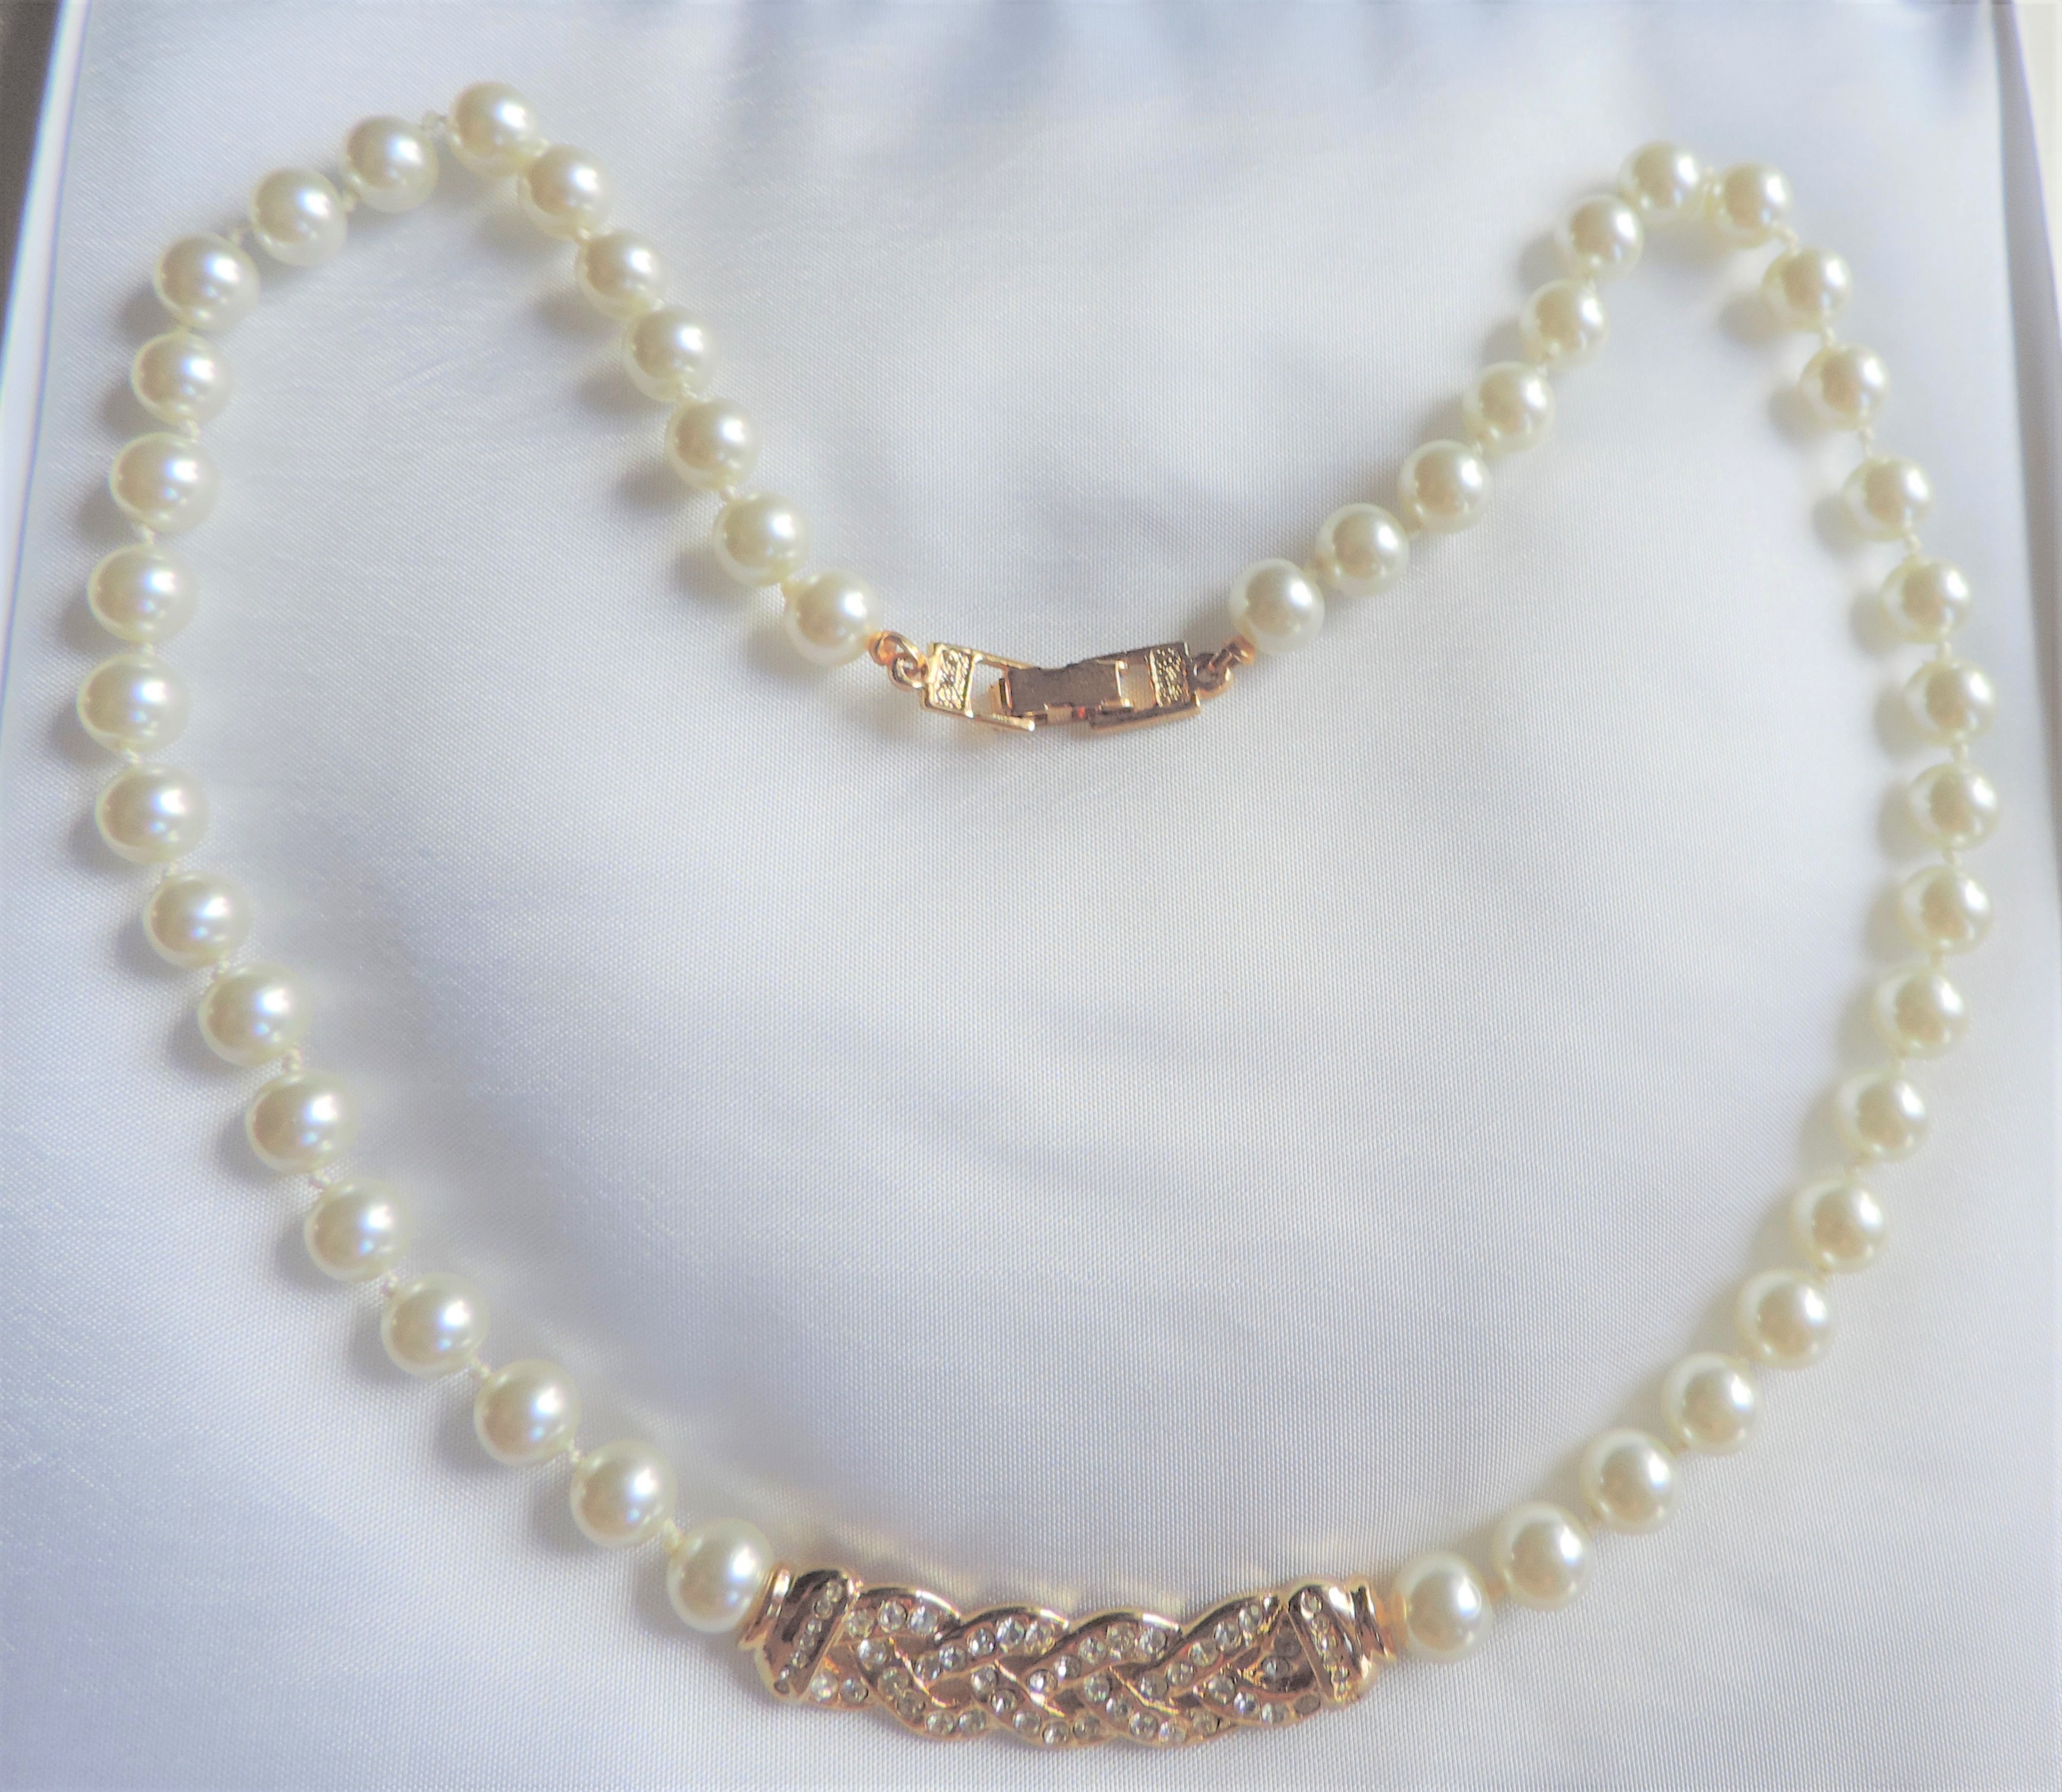 20 inch Single Strand Pearl & Crystal Necklace with Gift Pouch - Image 3 of 4